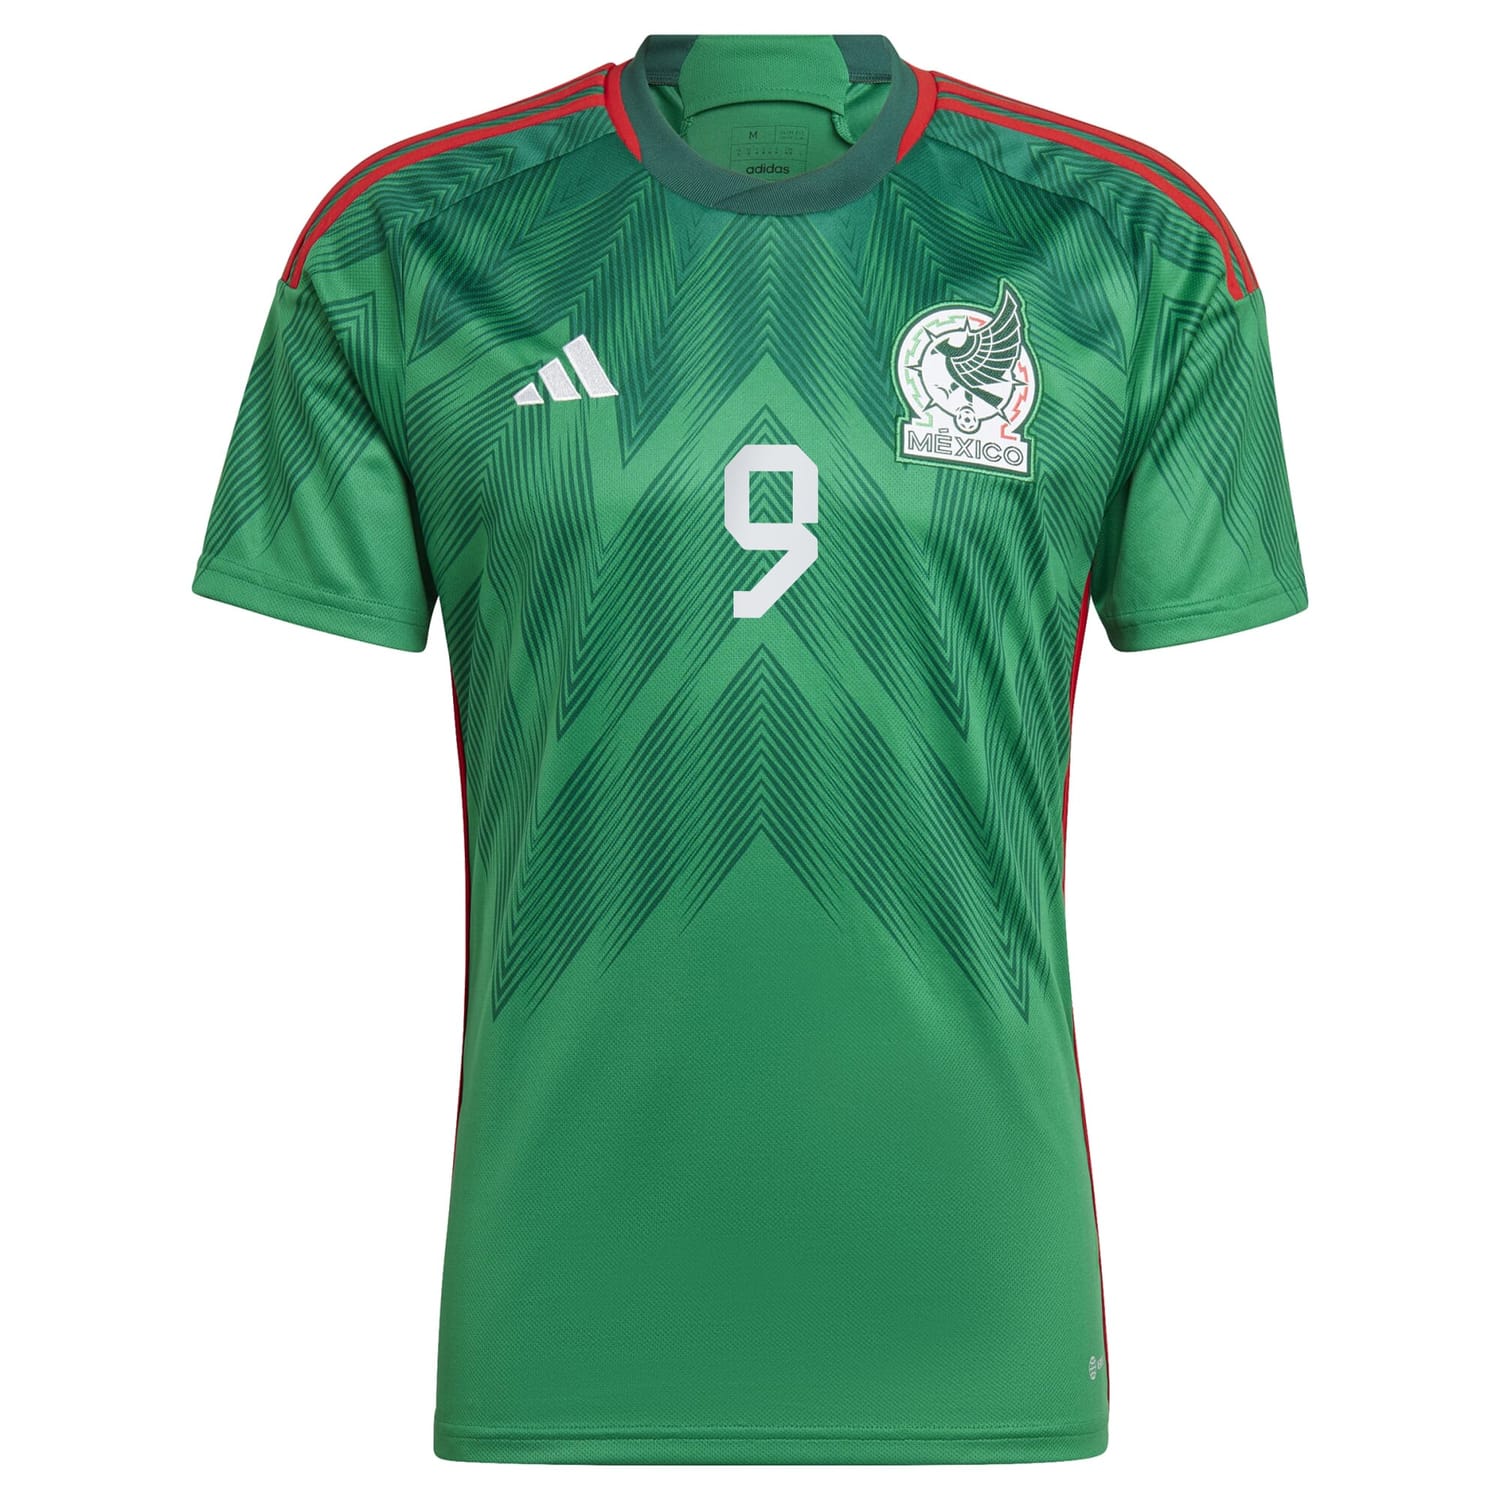 Mexico National Team Home Jersey Shirt Green 2022-23 player Raul Jimenez printing for Men